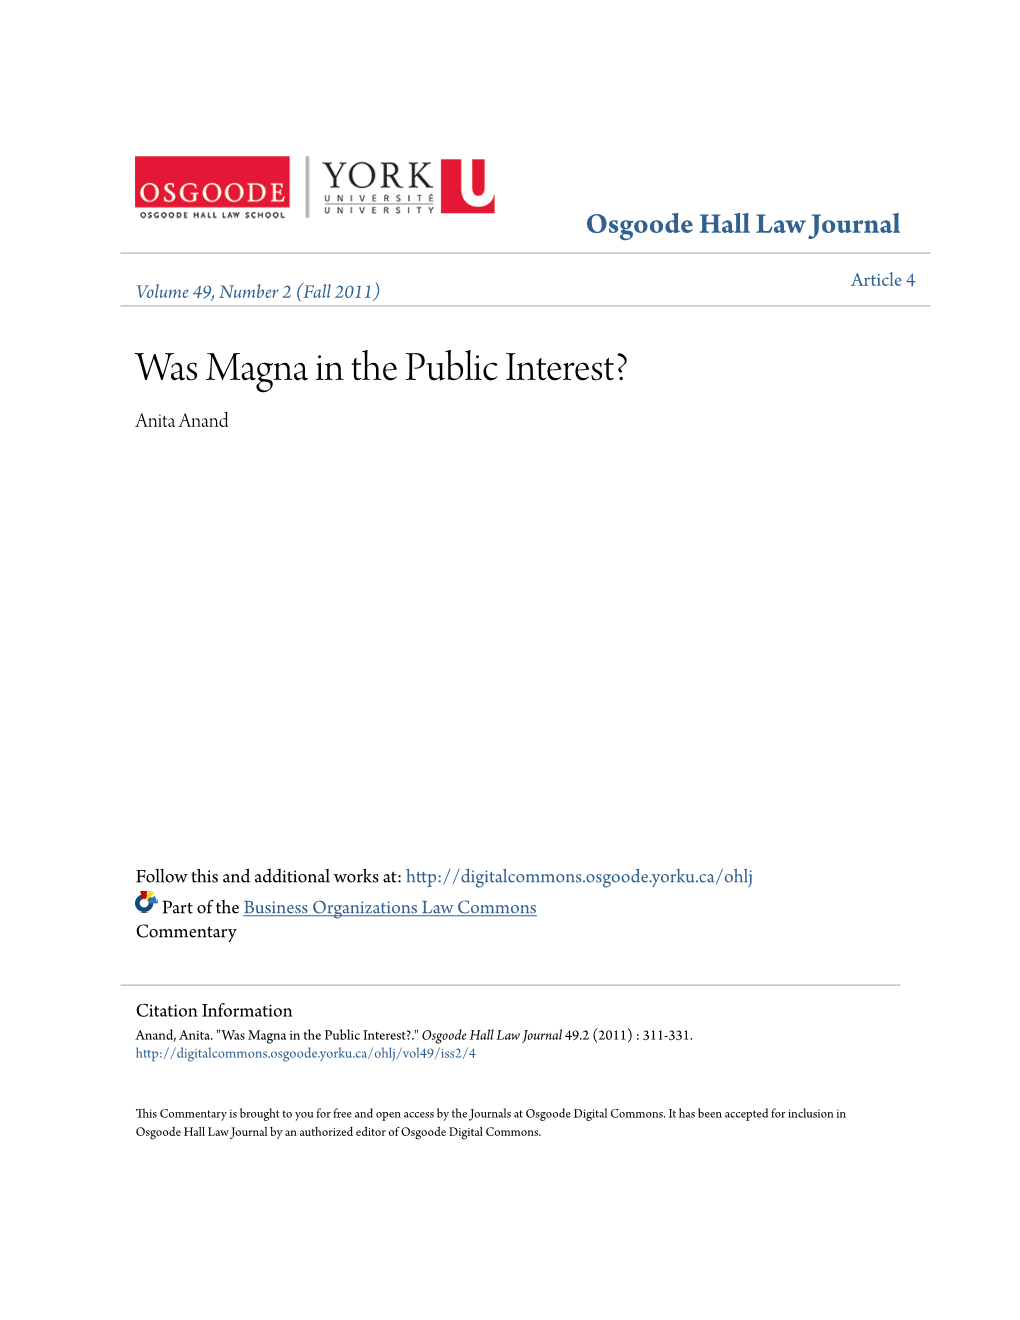 Was Magna in the Public Interest? Anita Anand